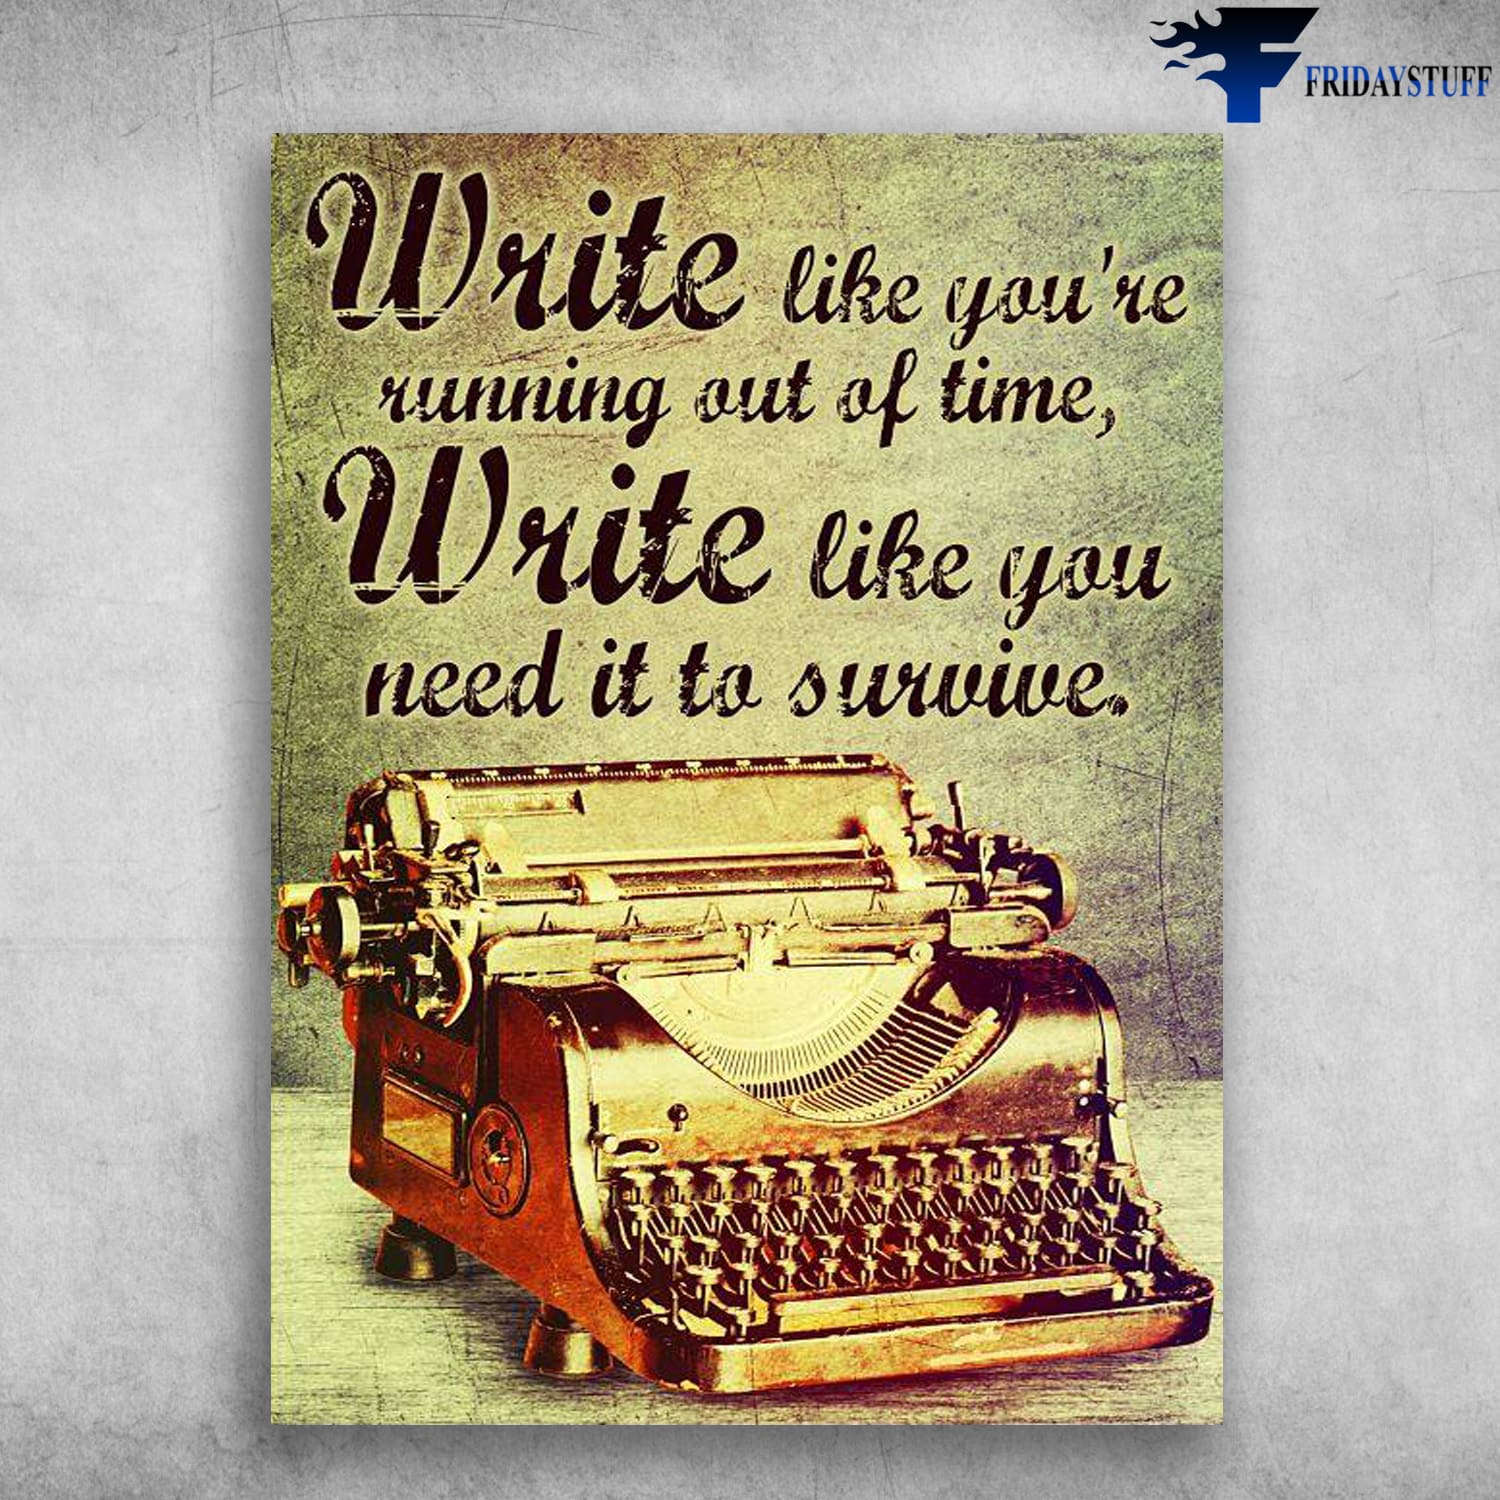 Typewriter Poster, Literature Gift, Write Like You're Running Out Of Time, Write Like You Need It To Survive